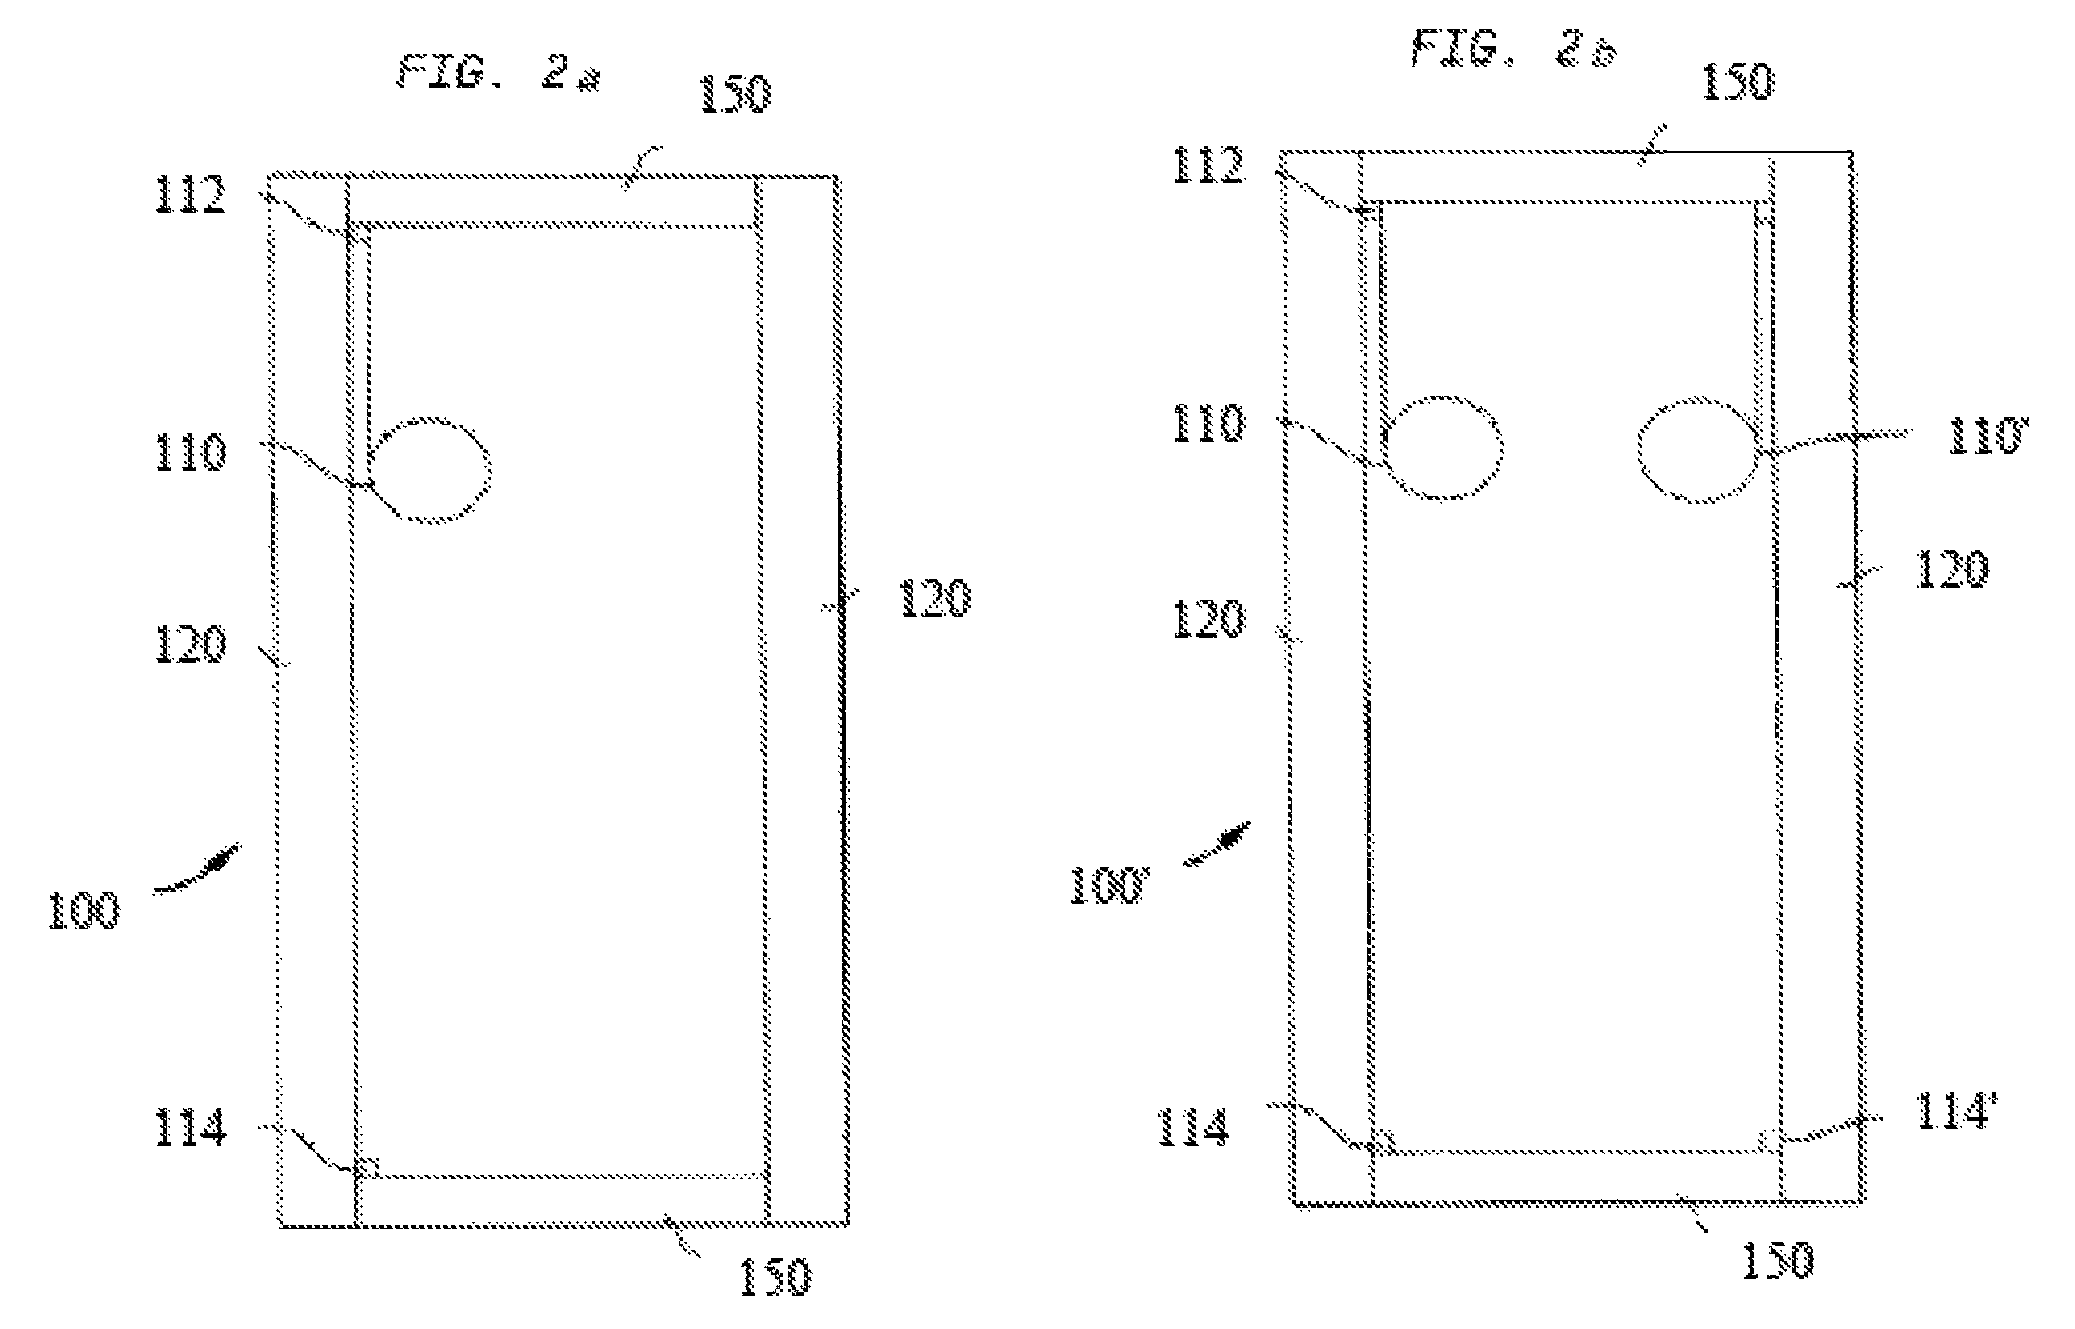 Insulated glazing unit and controller providing energy savings and privacy